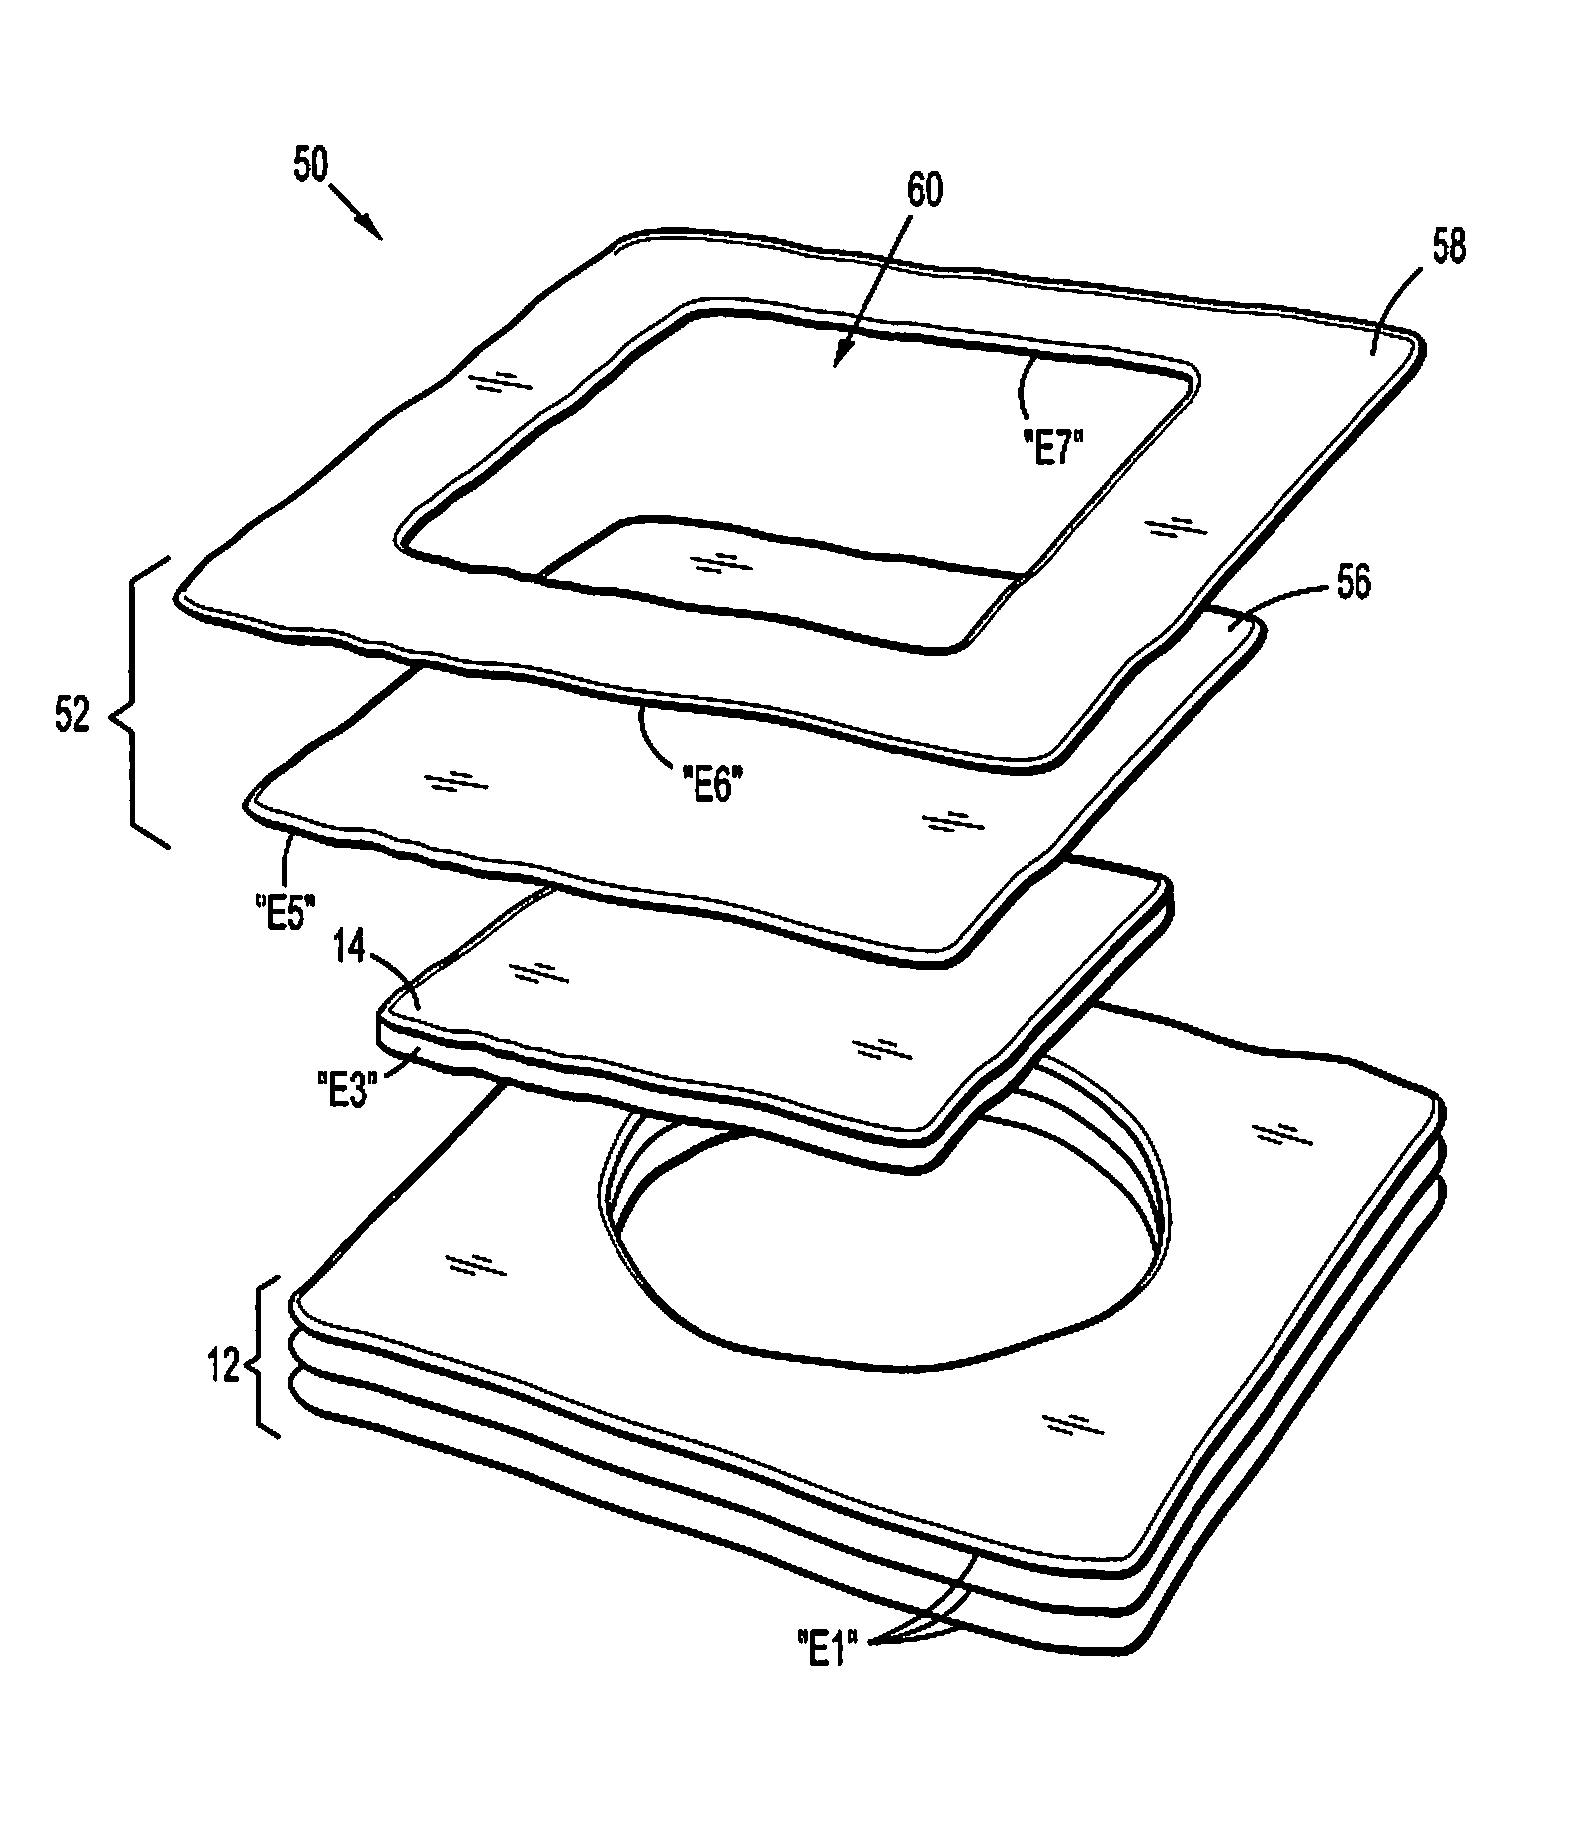 Wound dressing with advanced fluid handling